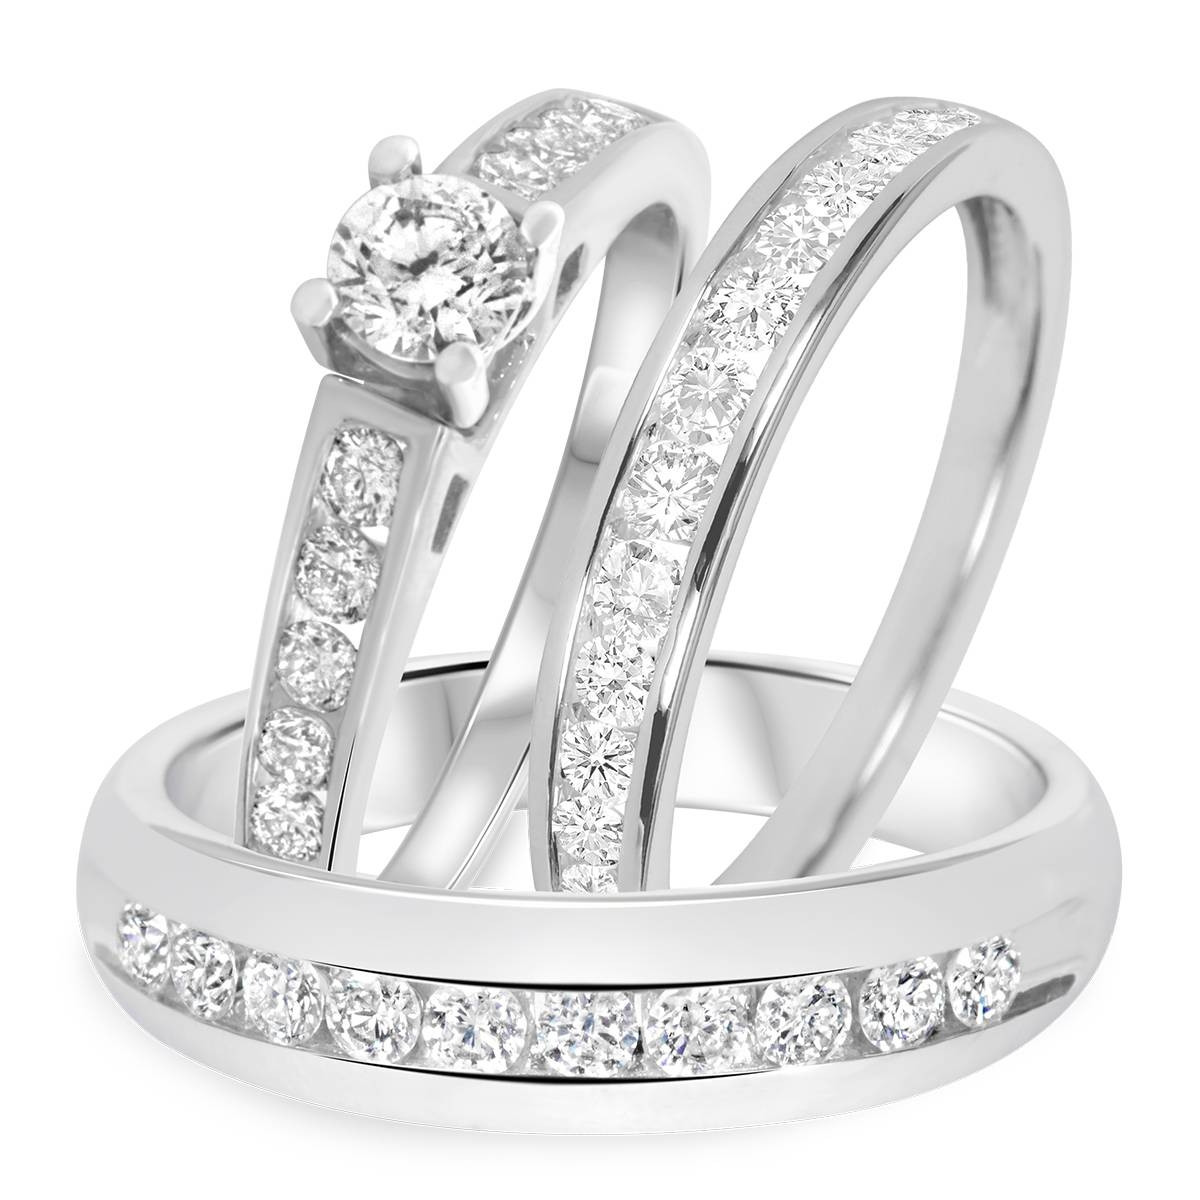 Cheap Wedding Rings Sets
 15 Inspirations of Cheap Wedding Bands Sets His And Hers